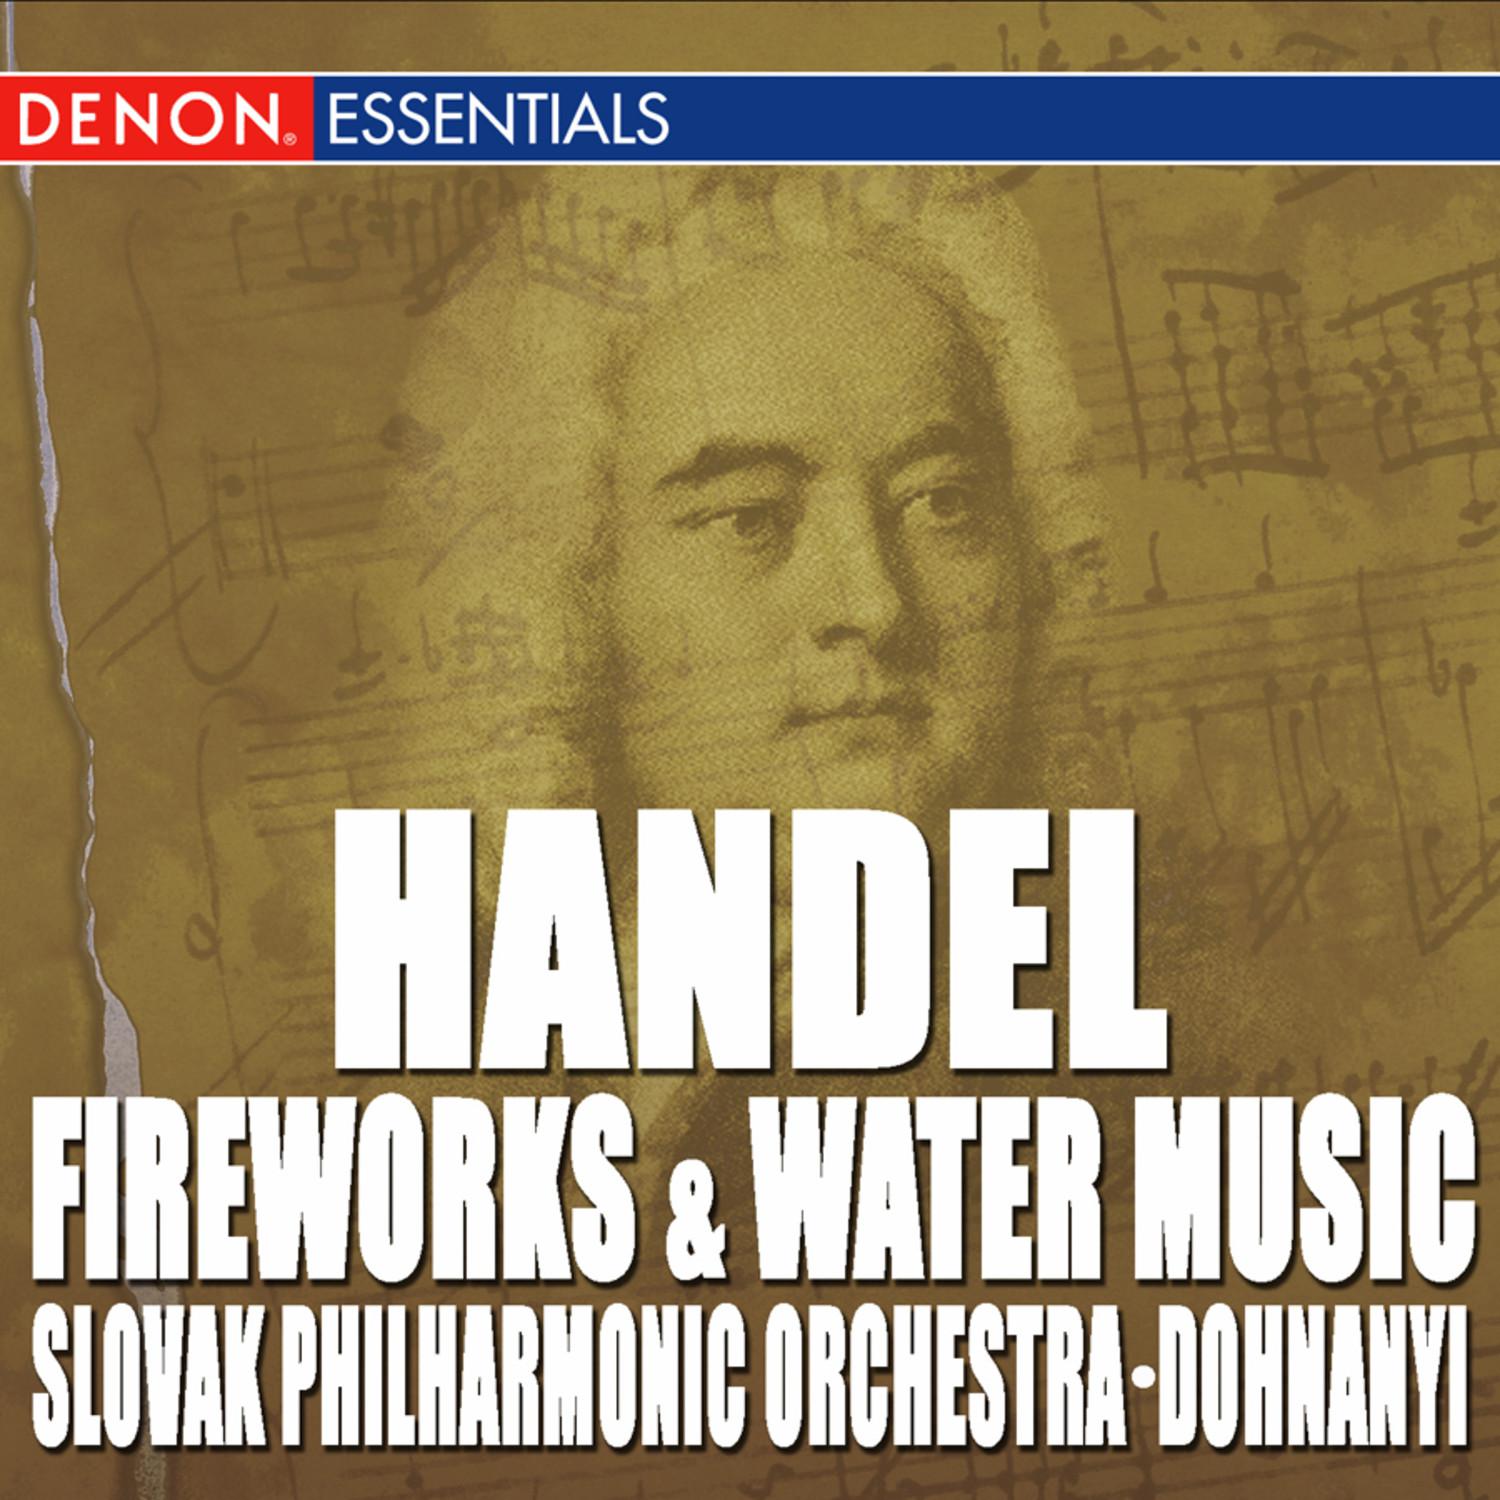 Water Music Suite No. 1 in F, HWV 348: I. Prelude